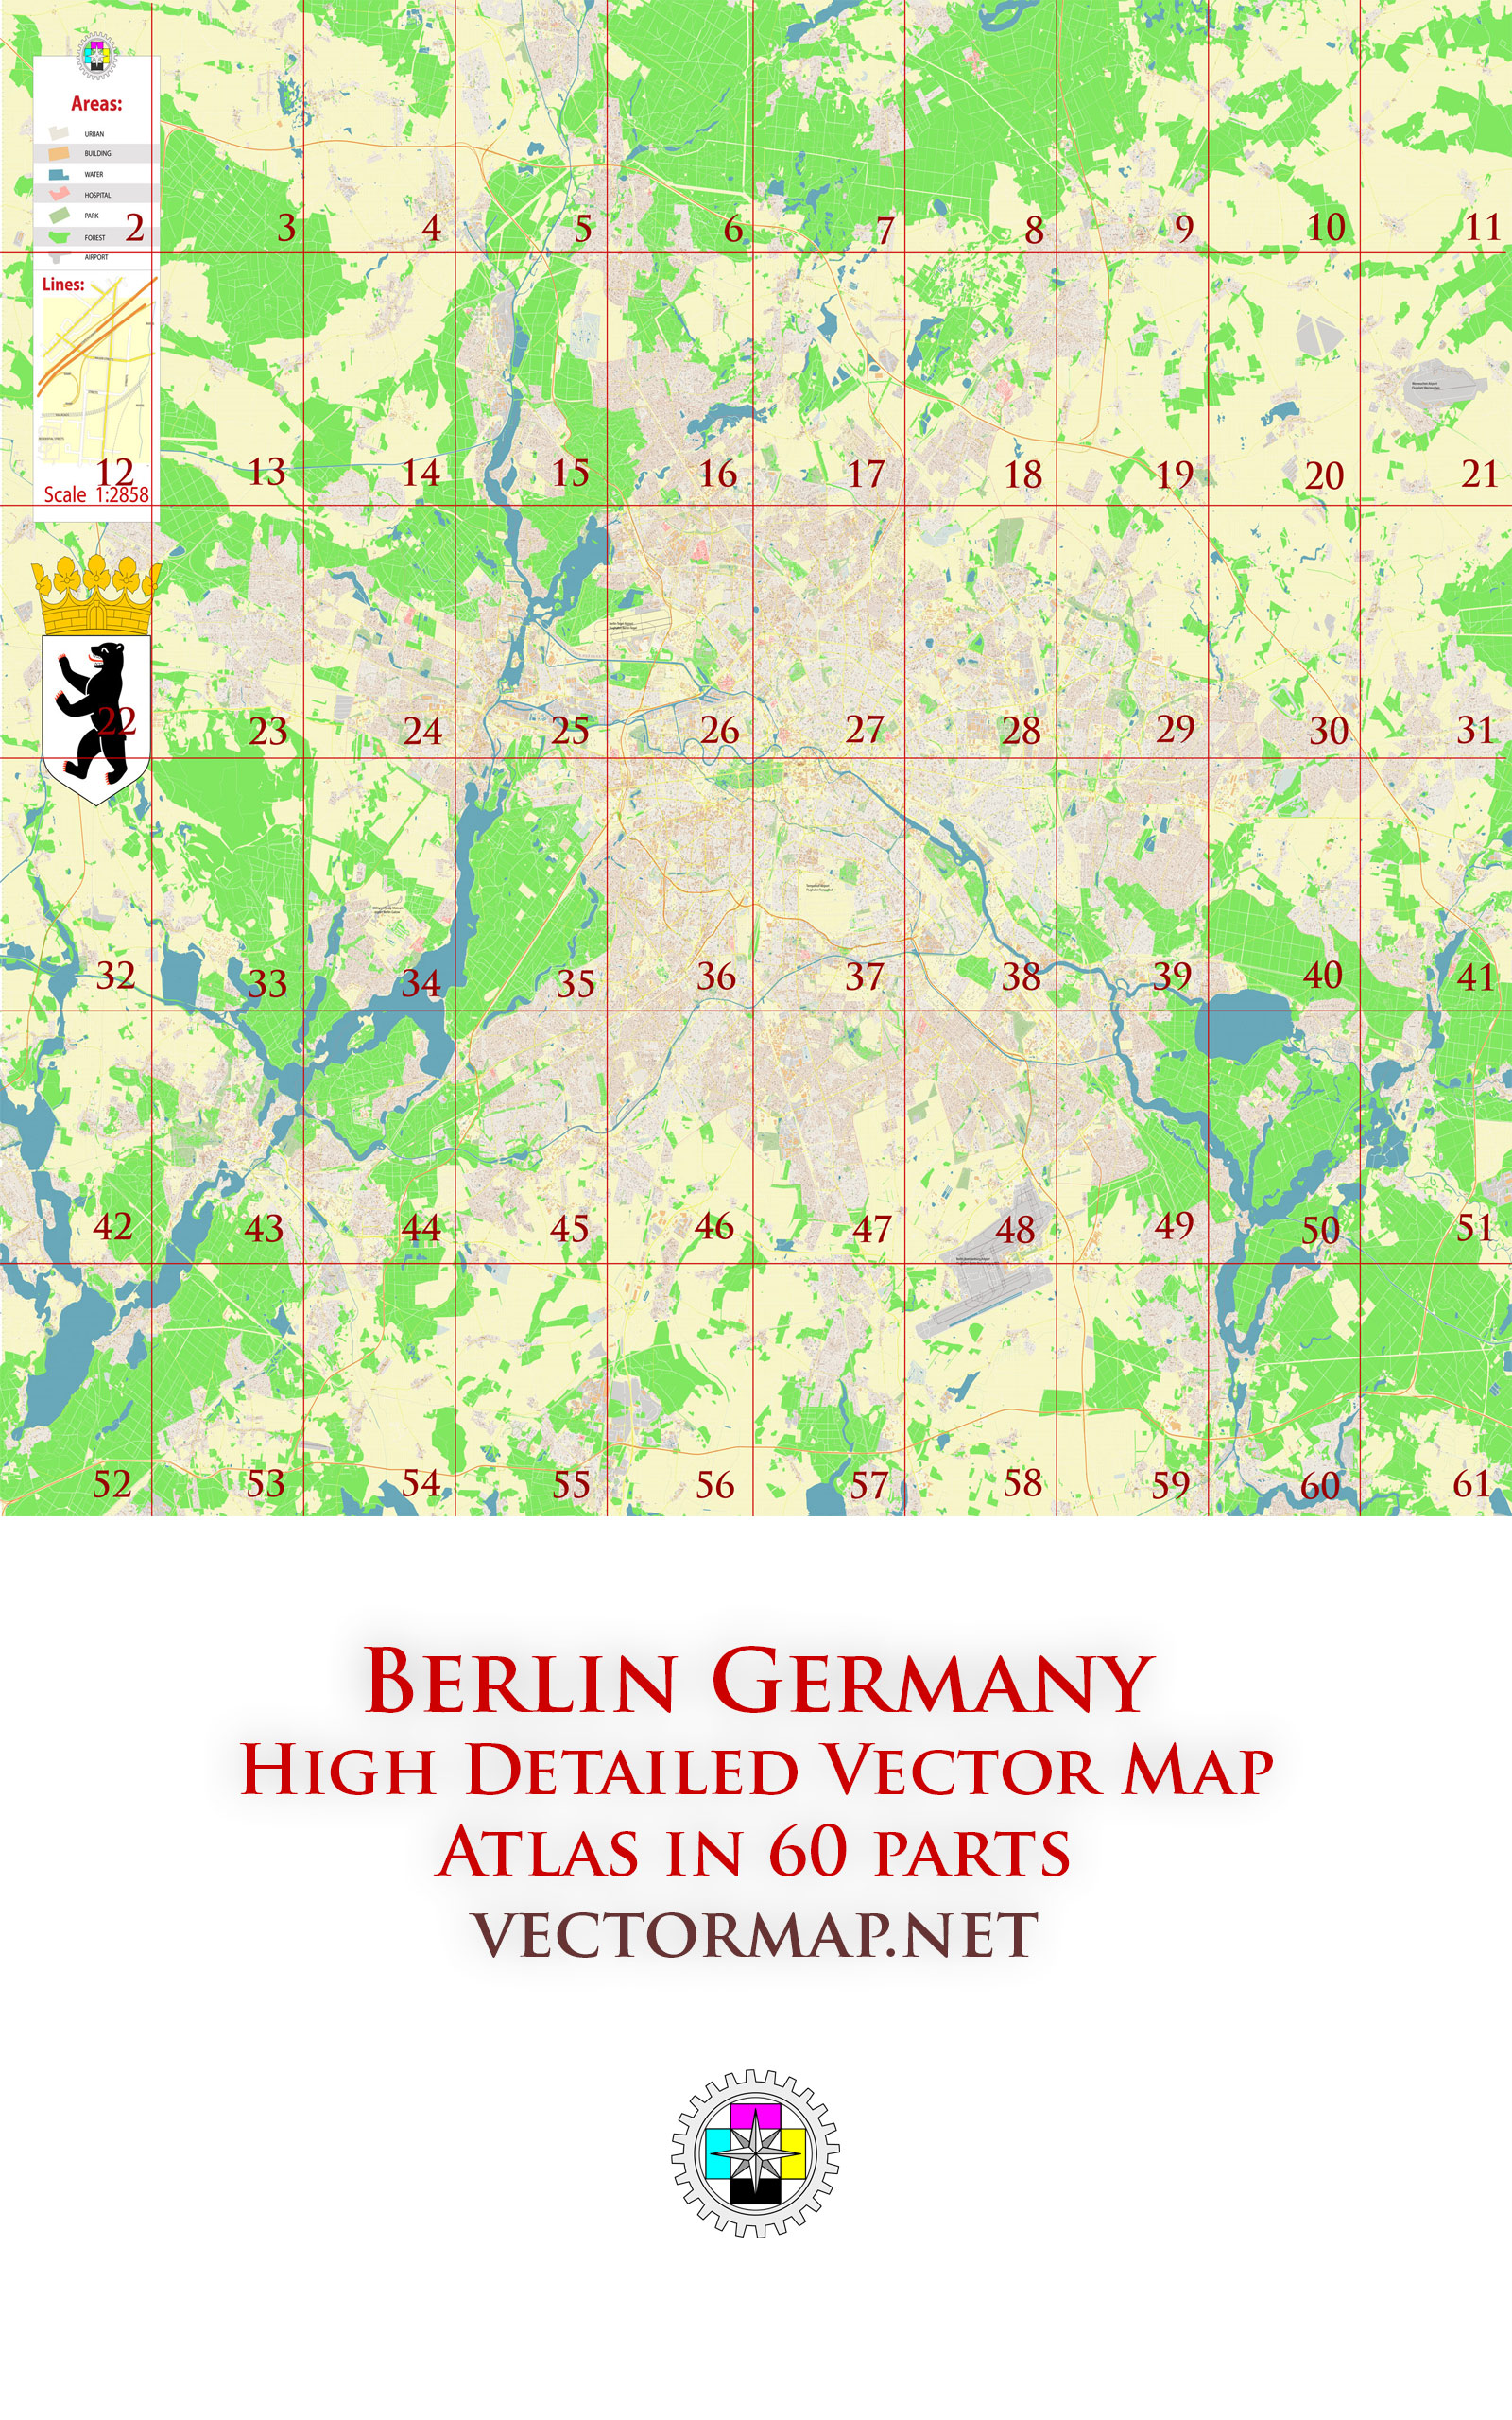 Berlin Germany Tourist Map multi-page atlas, contains 60 pages vector PDF